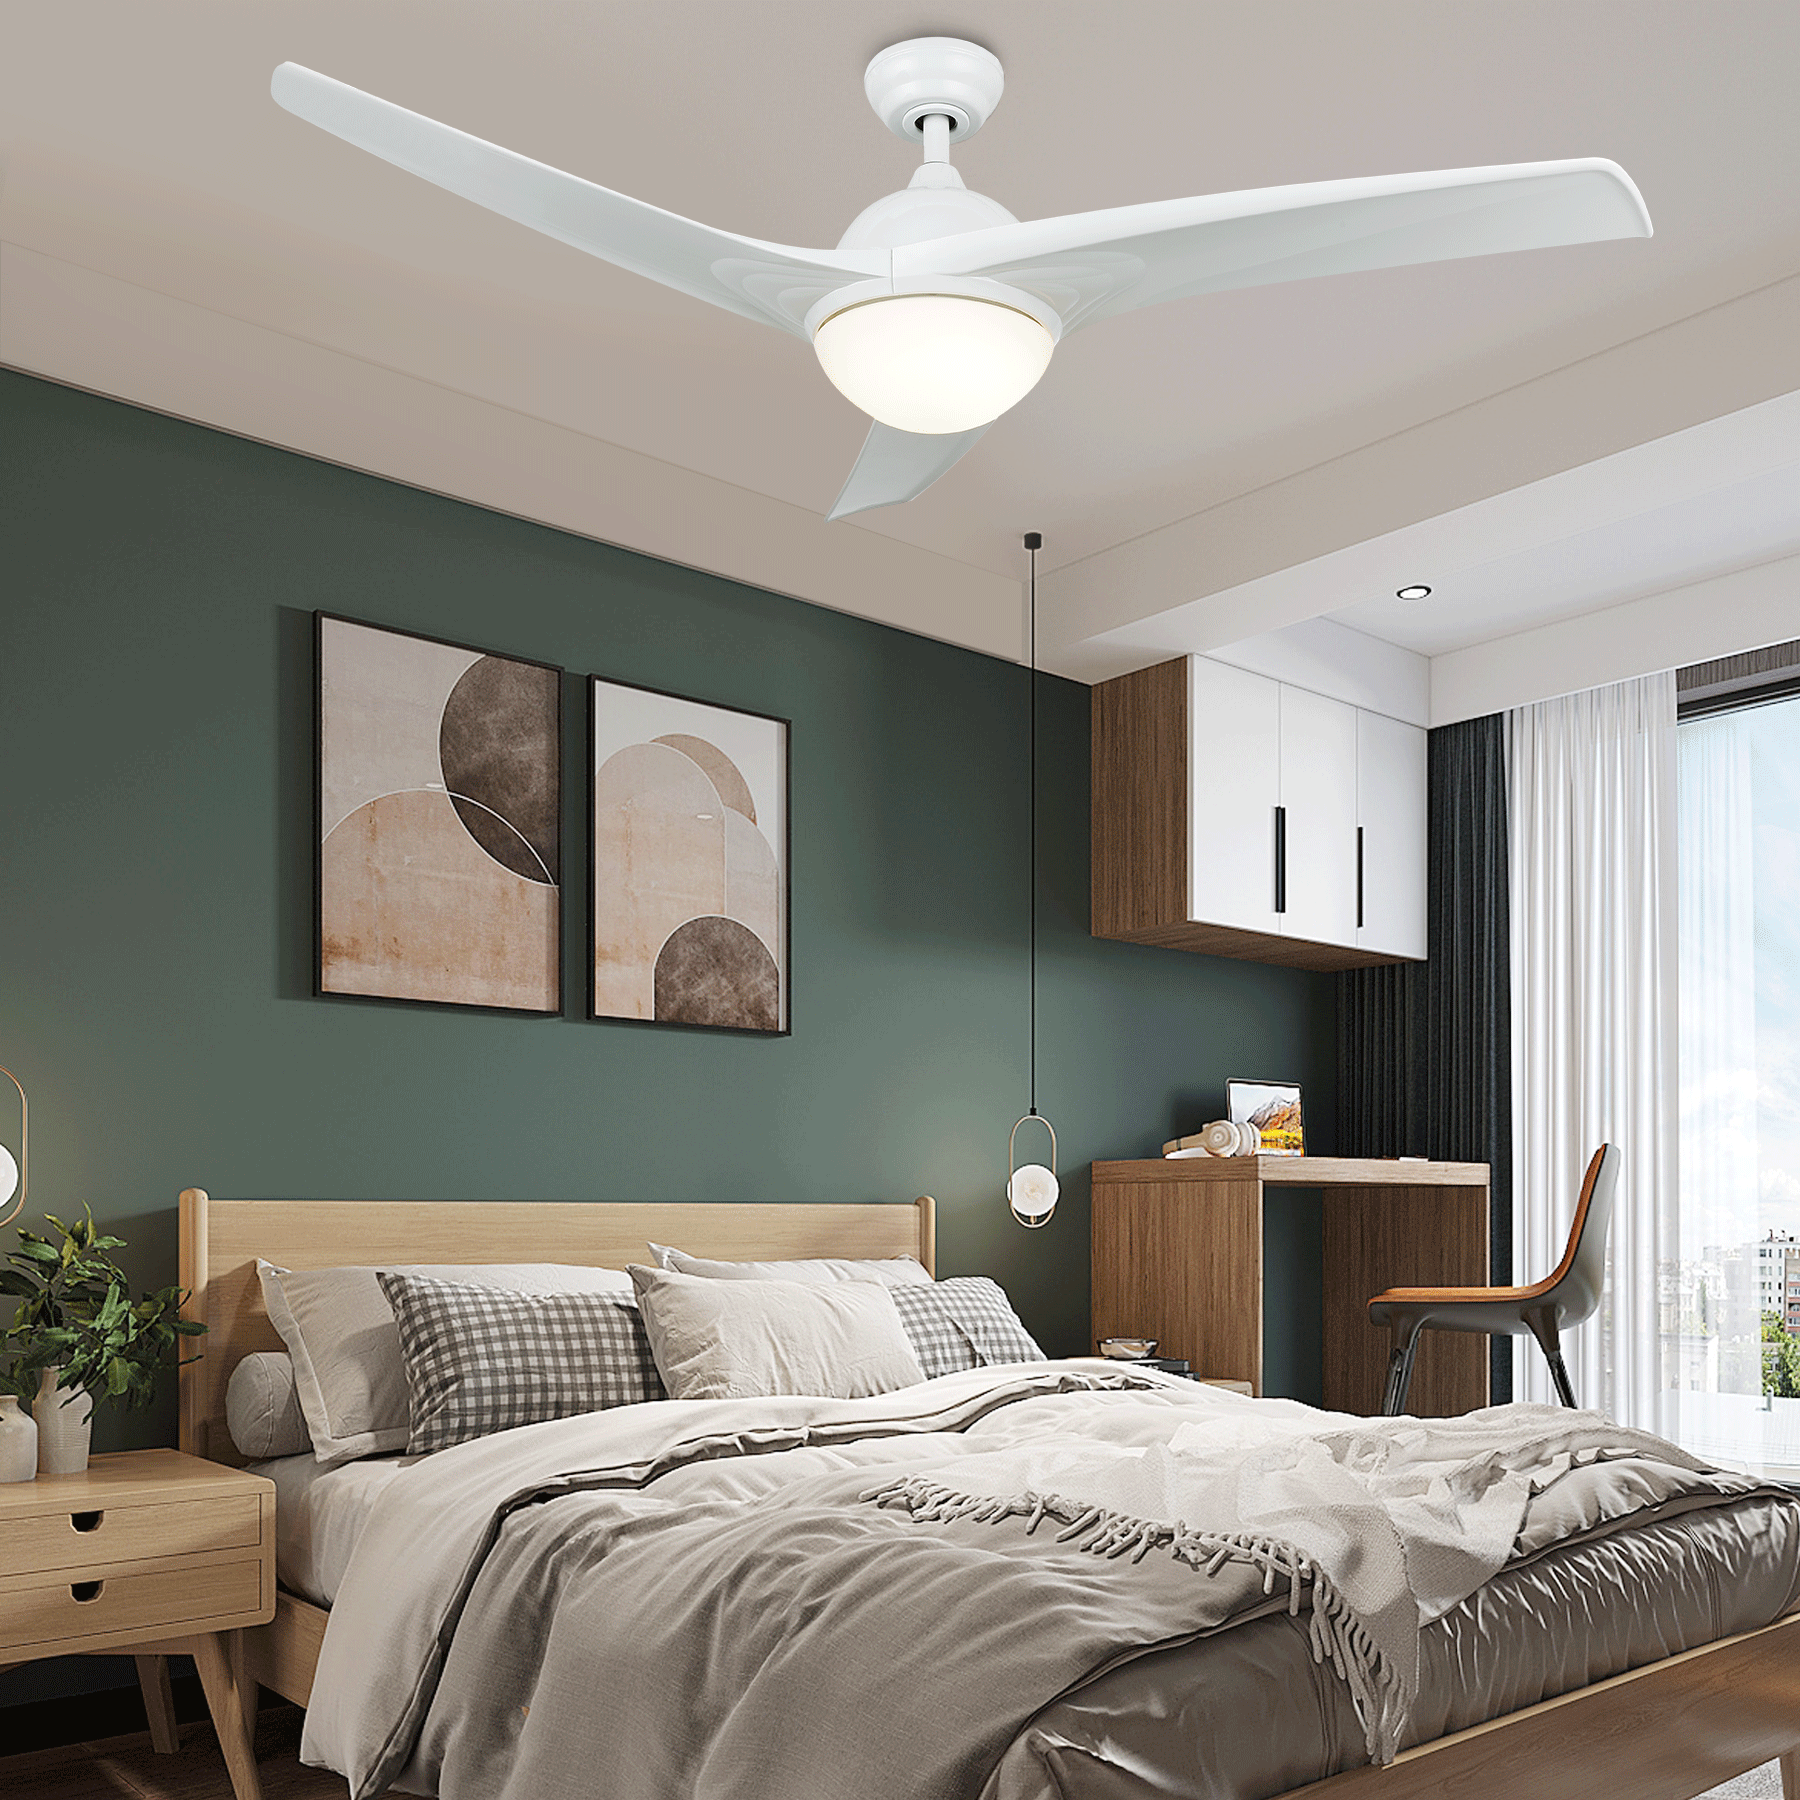 42" Ceiling Fan Light LED 3 Adjustable Colors Modern Style Room Decor w/ Remote 